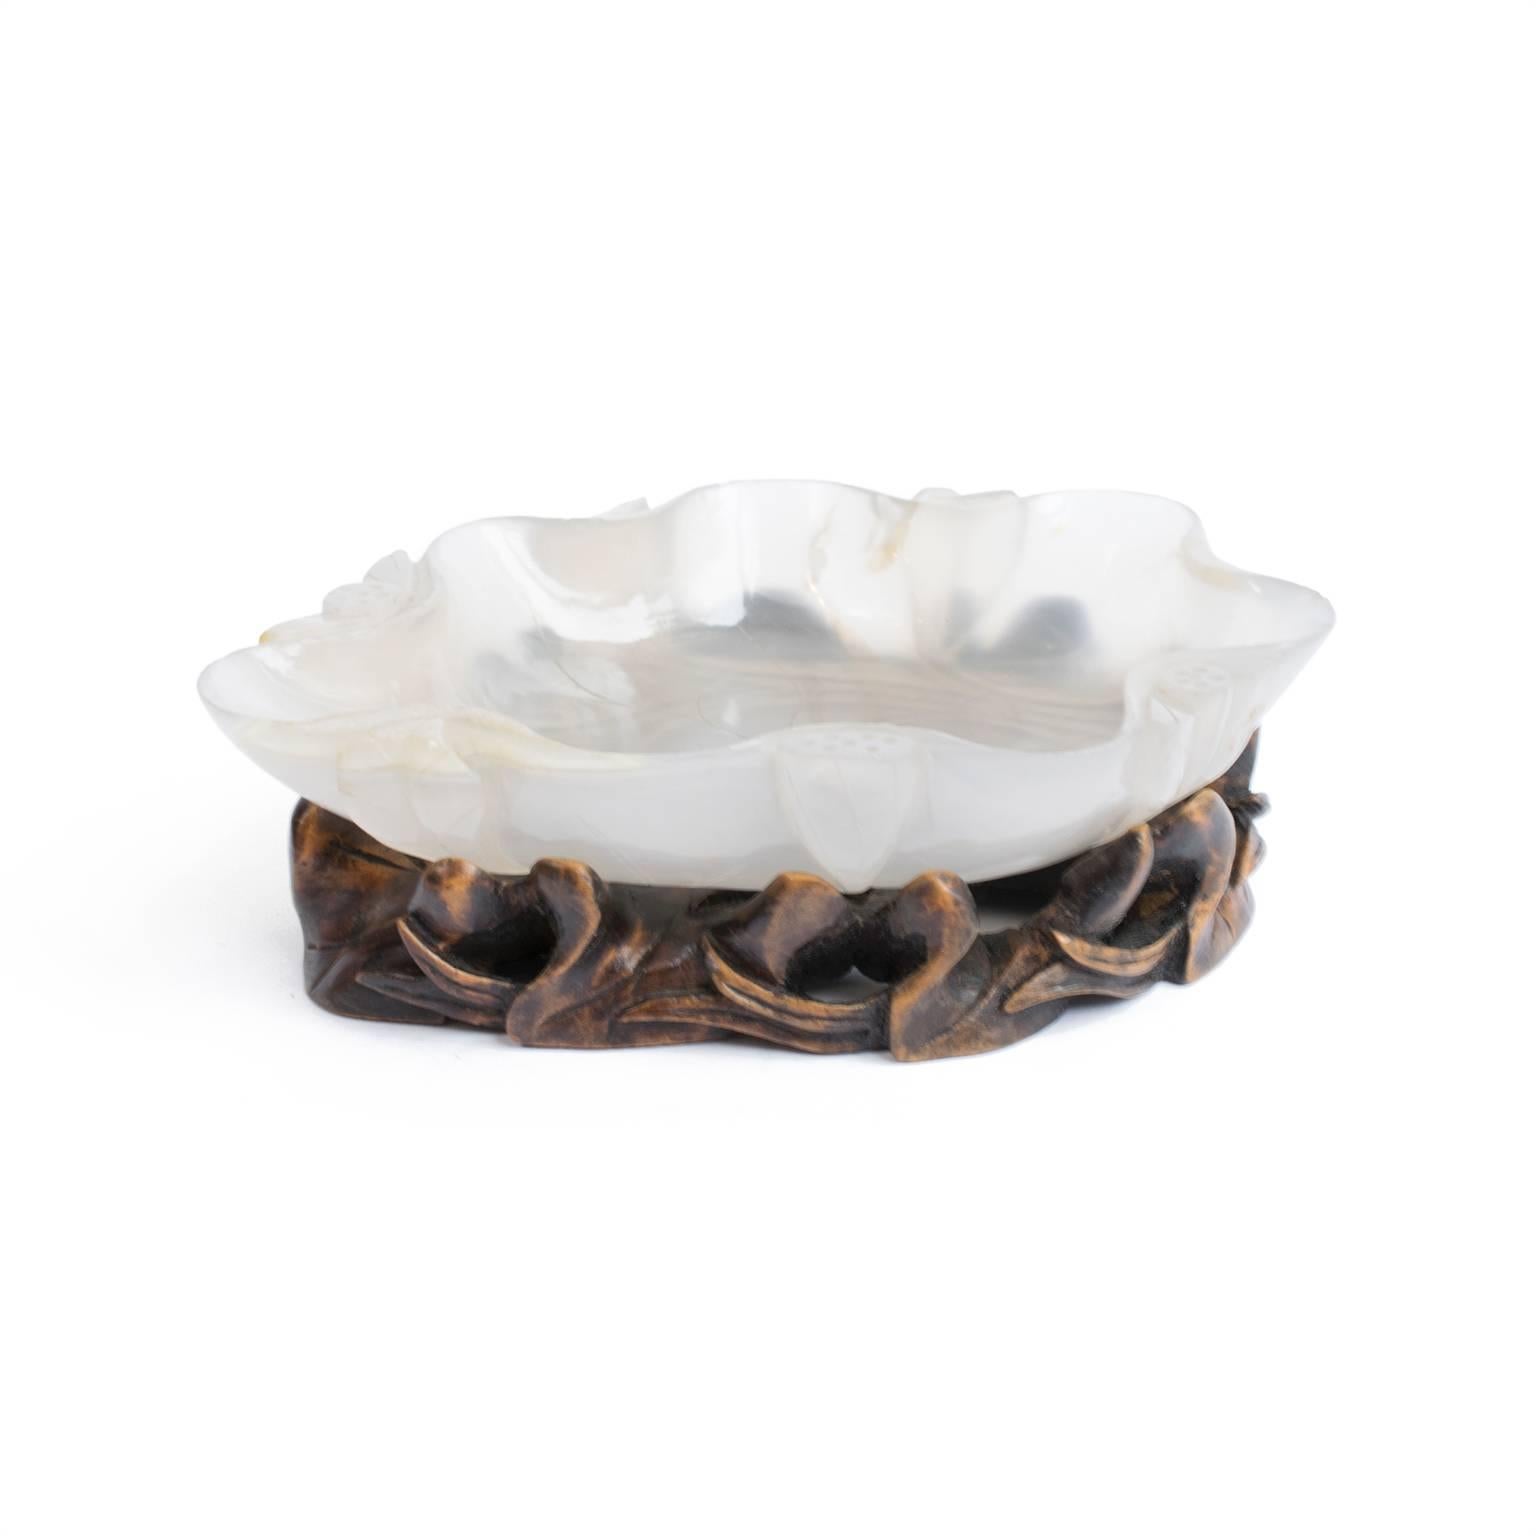 Qing 19th Century Chinese Agate Brush Washer Carved in the Form of a Lotus Leaf